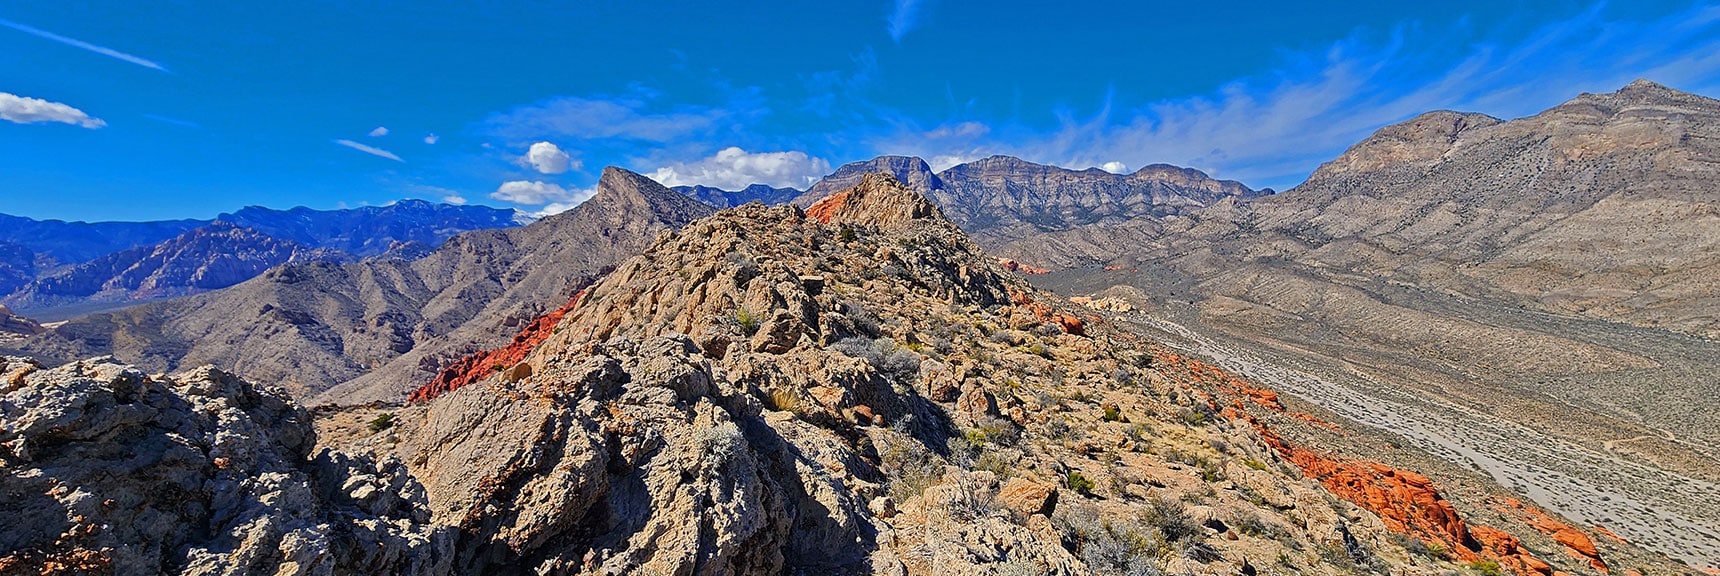 View Ahead. High Points to Easily Weave. Next Openings Only Visible When Close. | Gray Cap Ridge / Brownstone Basin Loop | La Madre Mountains Wilderness, Nevada